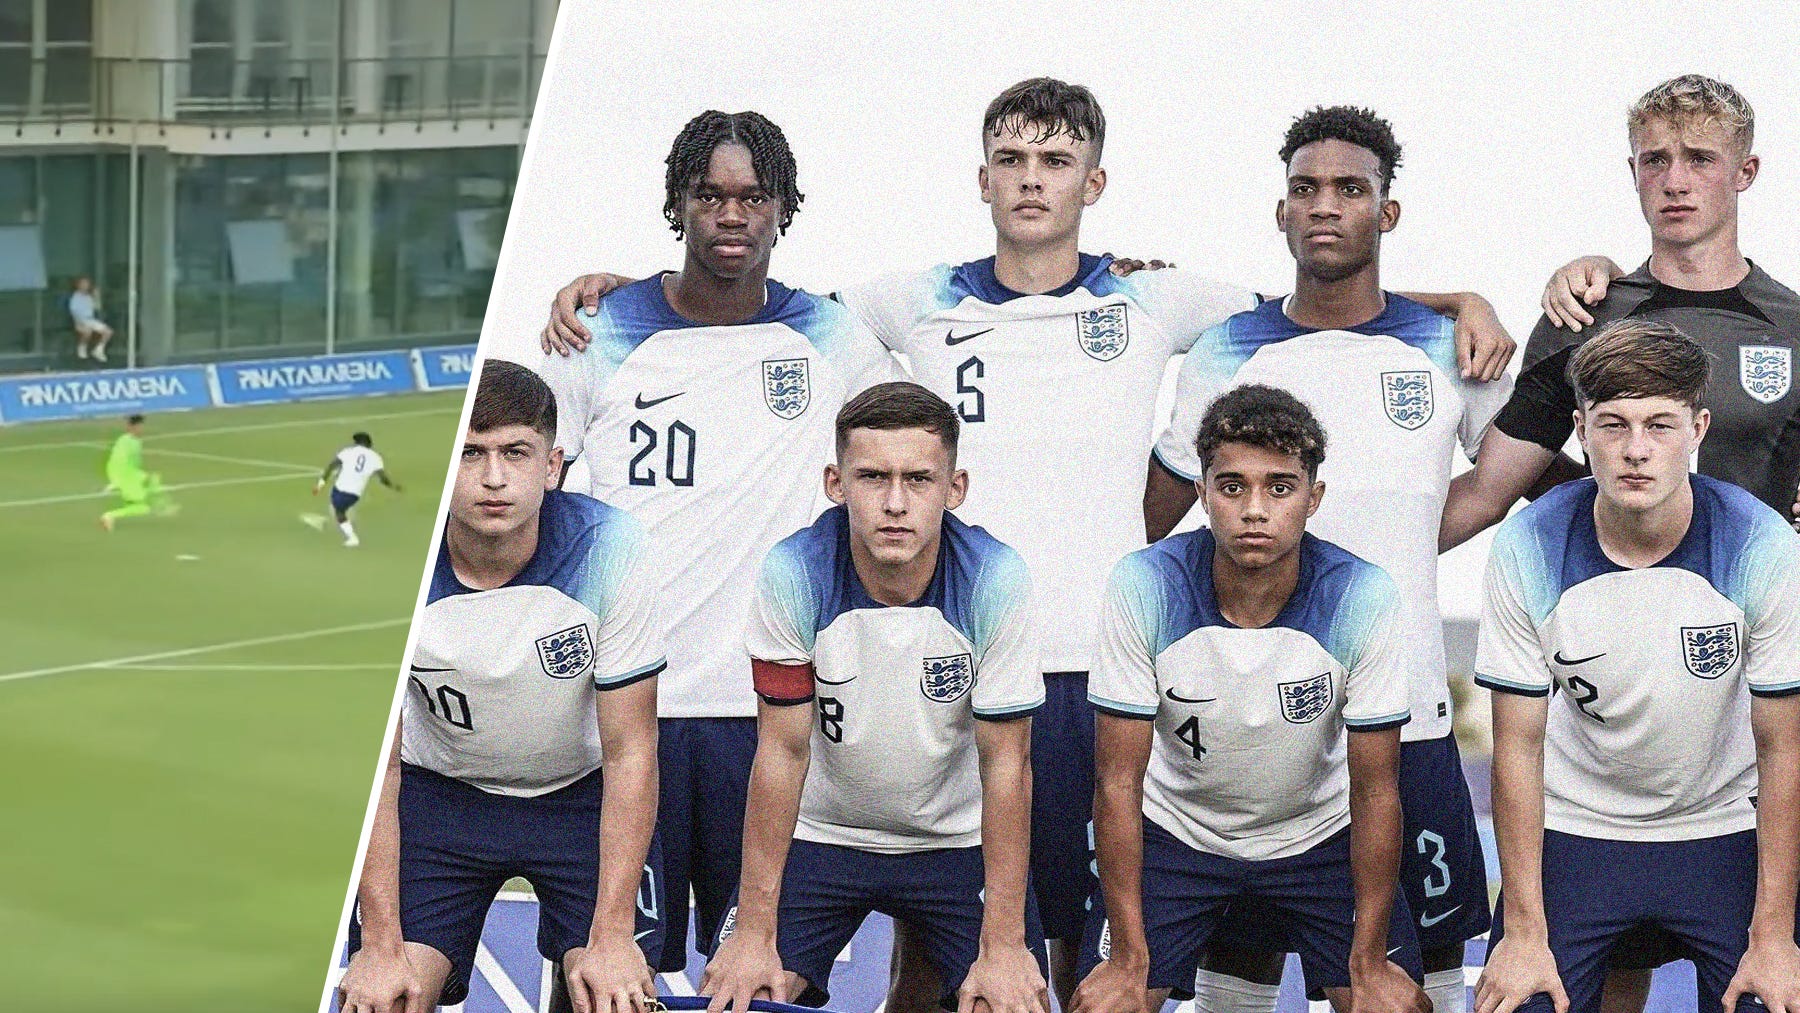 A composite image featuring a team photo of England's U-17 team ahead of their friendly against Portugal and a screenshot of Shim Mheuka scoring a one-v-one in the same game